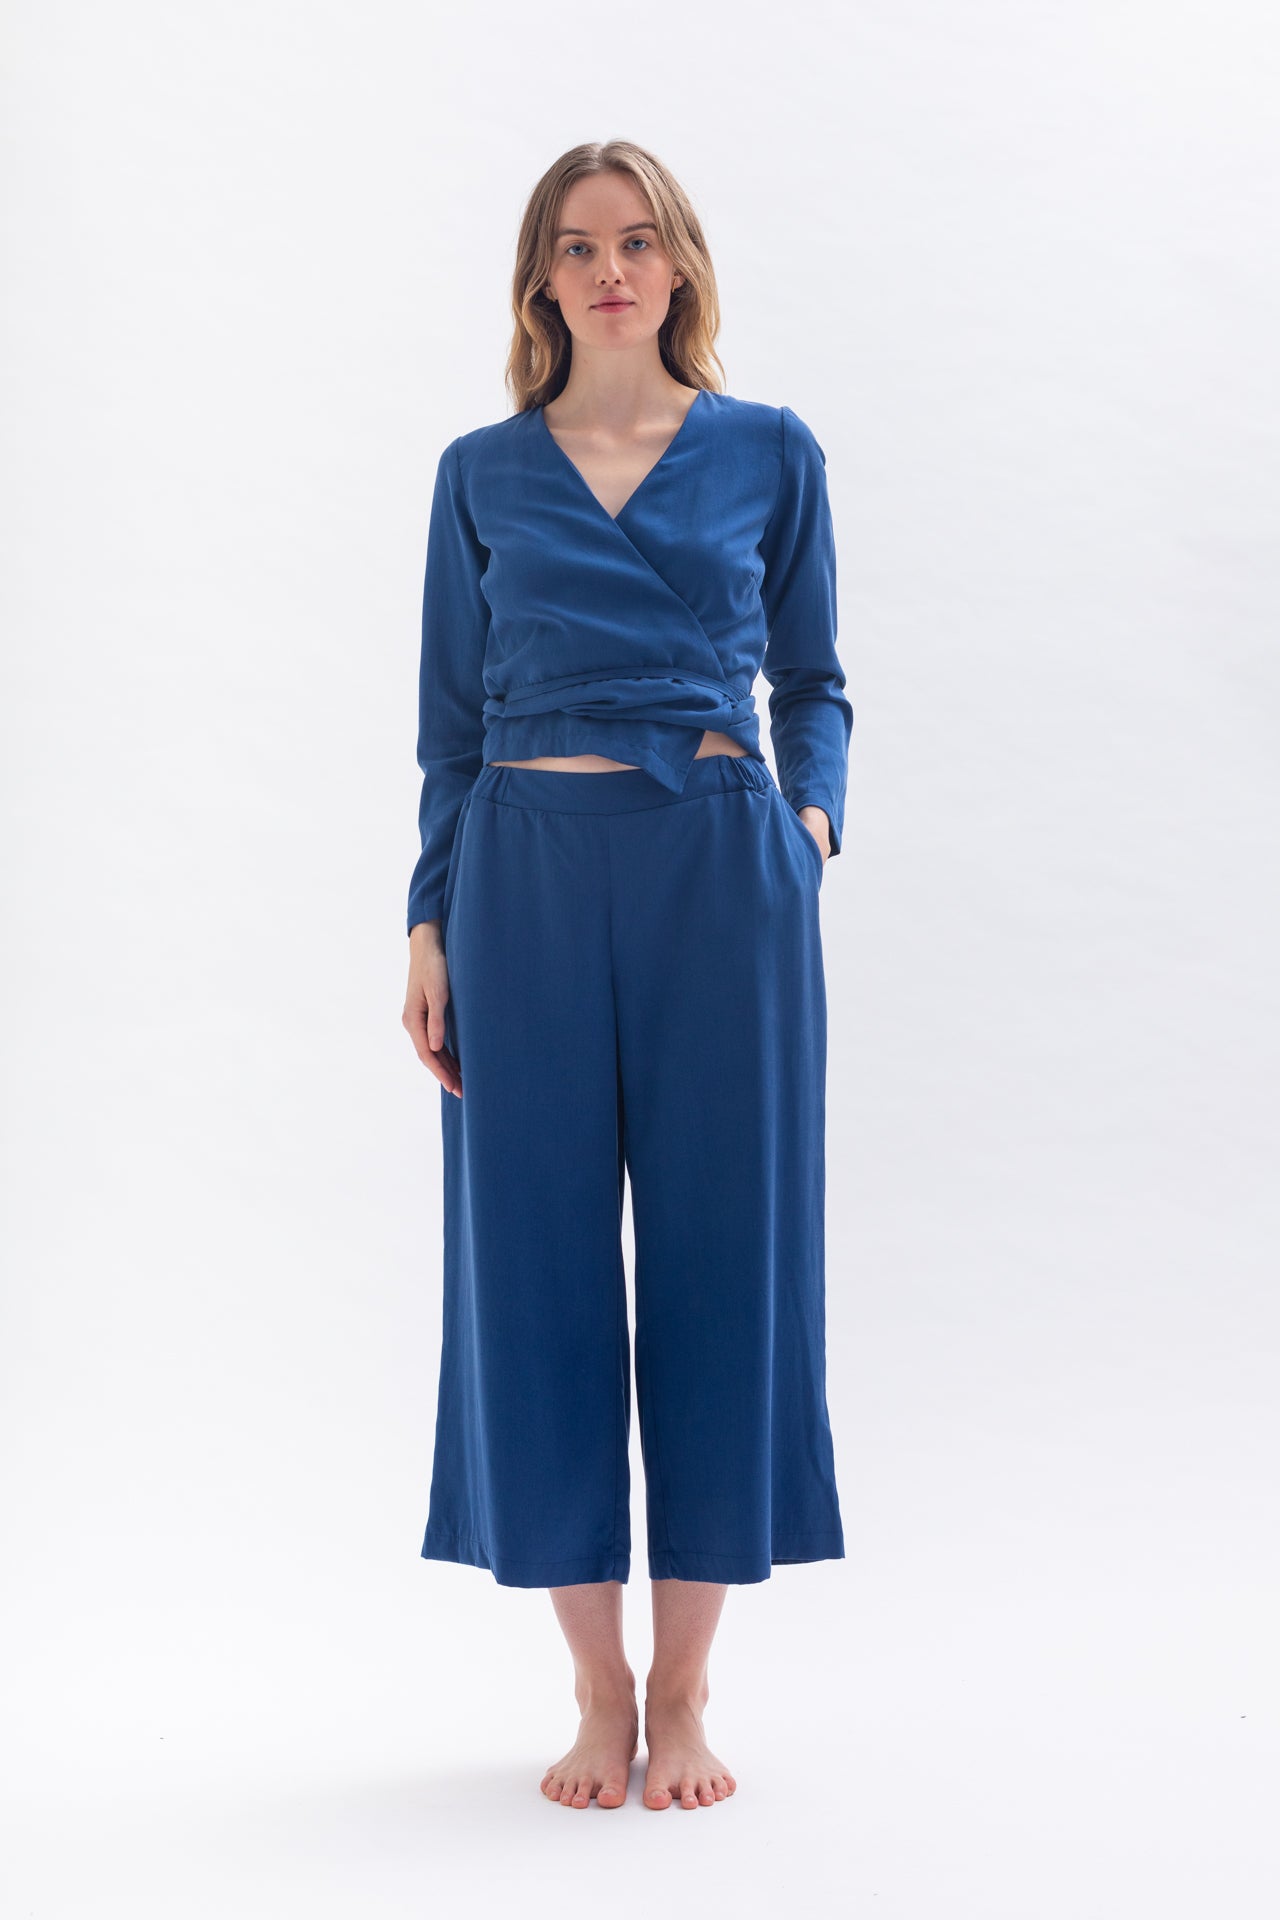 Culottes THEE-KLA in blue made of Tencel